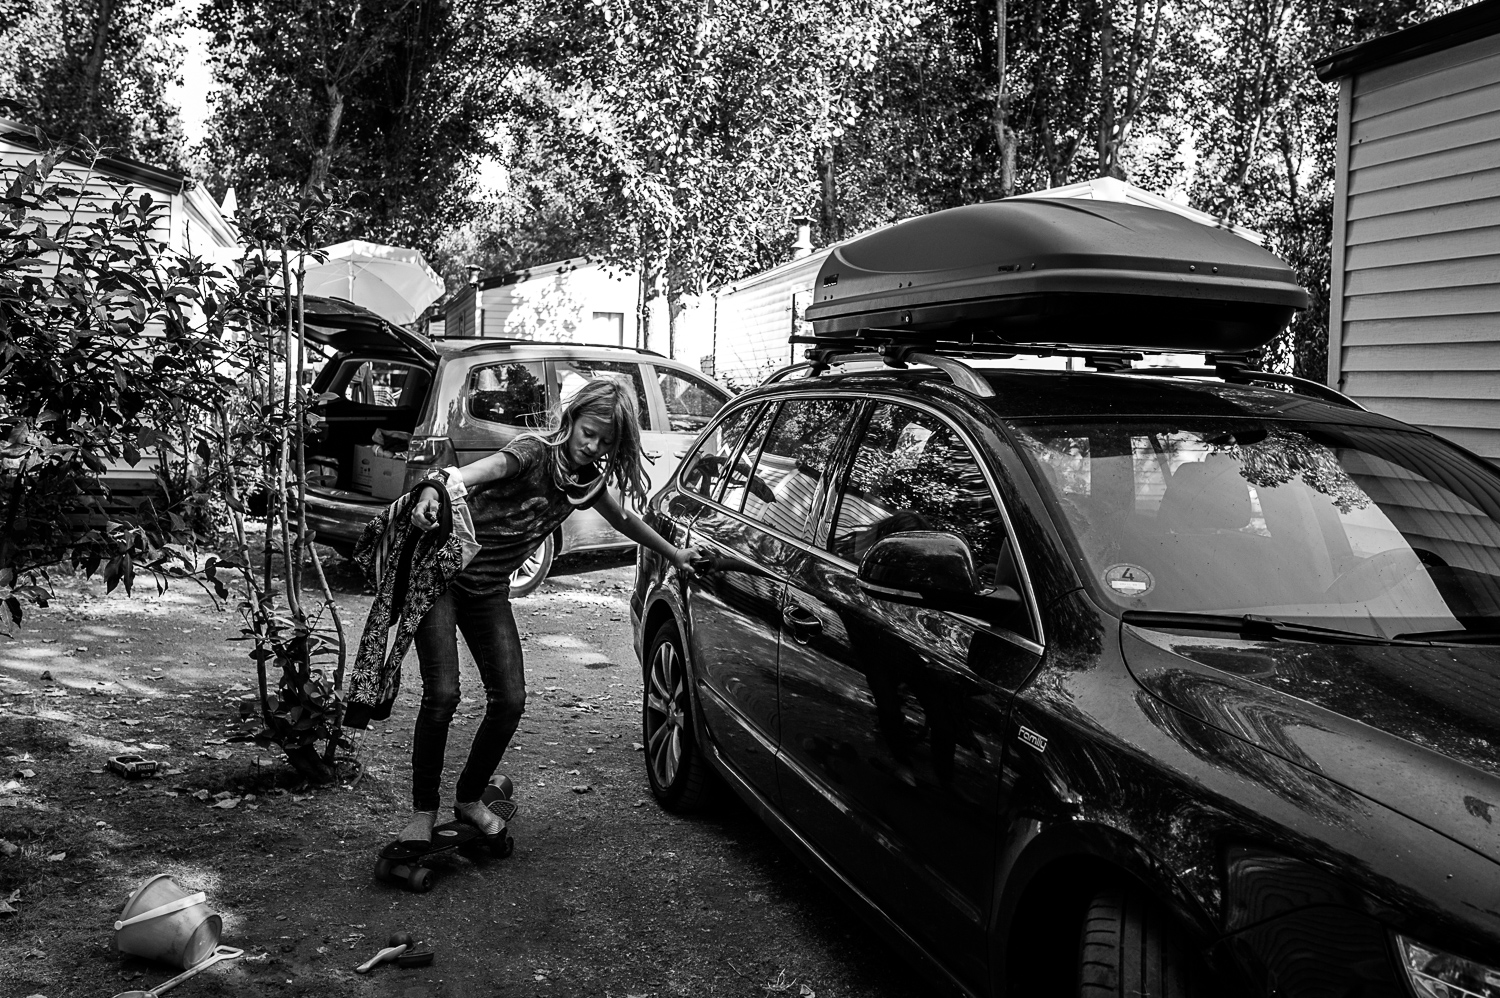 Family holidays in France - Day in the life session - family photojournalism - Camping family life in Beziers France